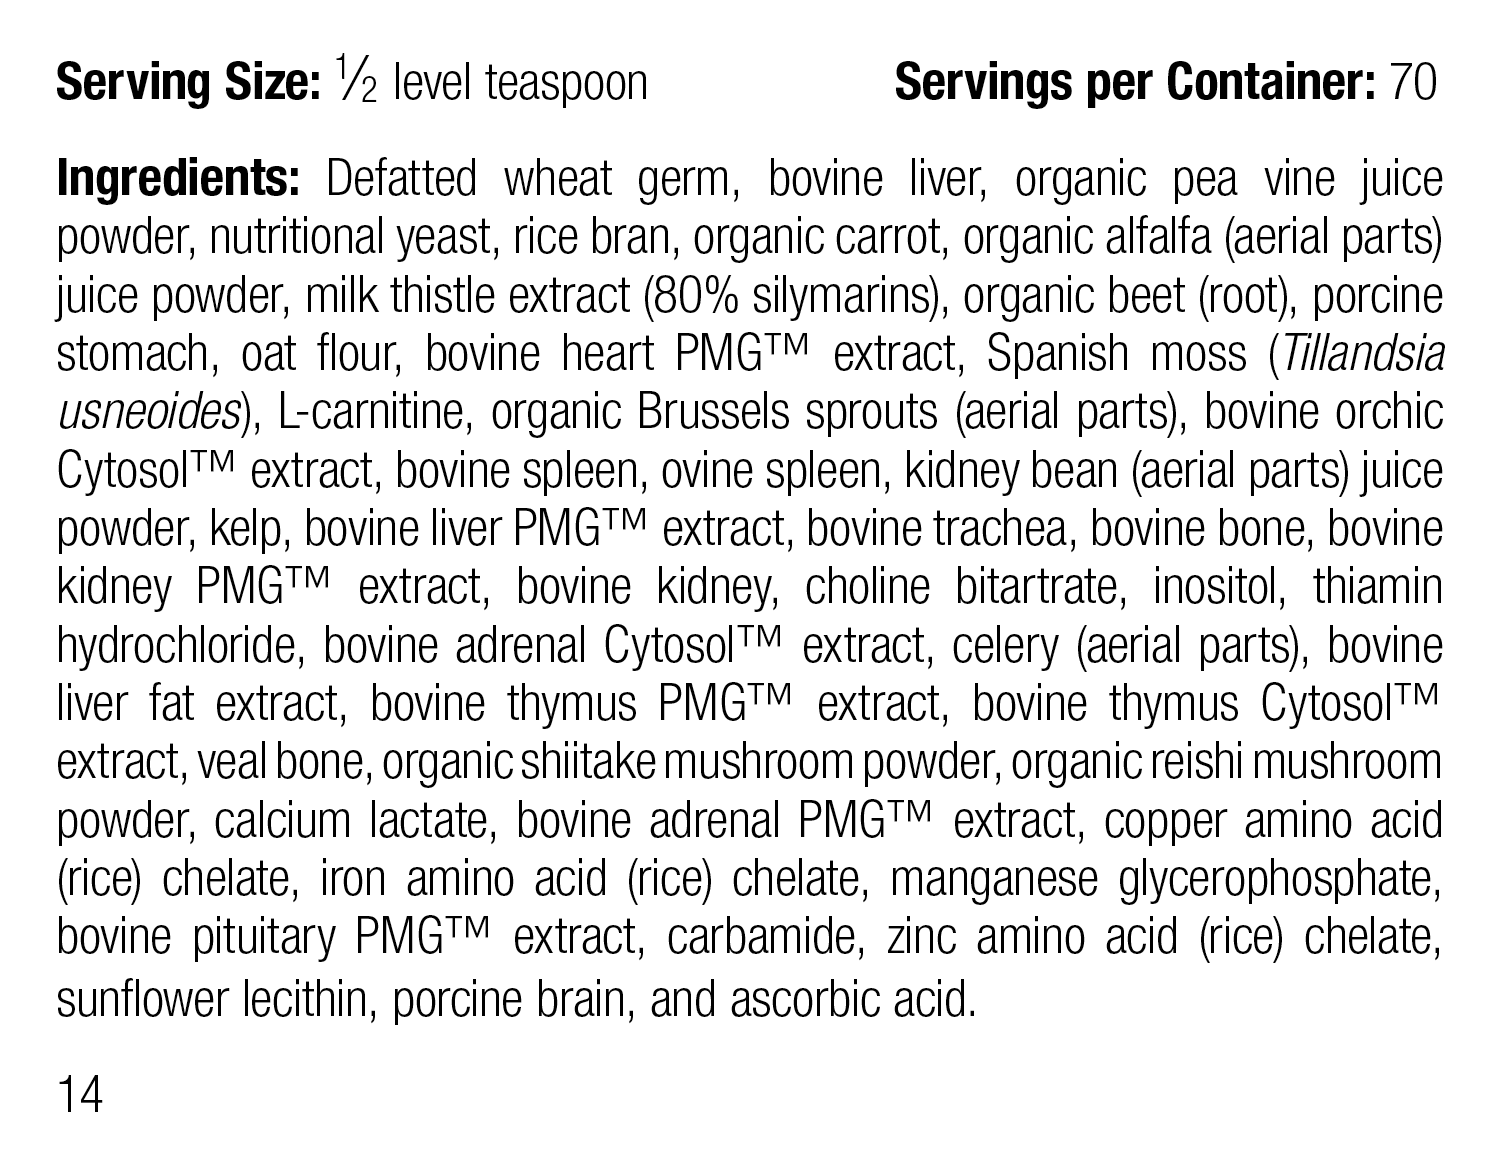 Canine Whole Body Support, 100 g, Rev 12 Supplement Facts